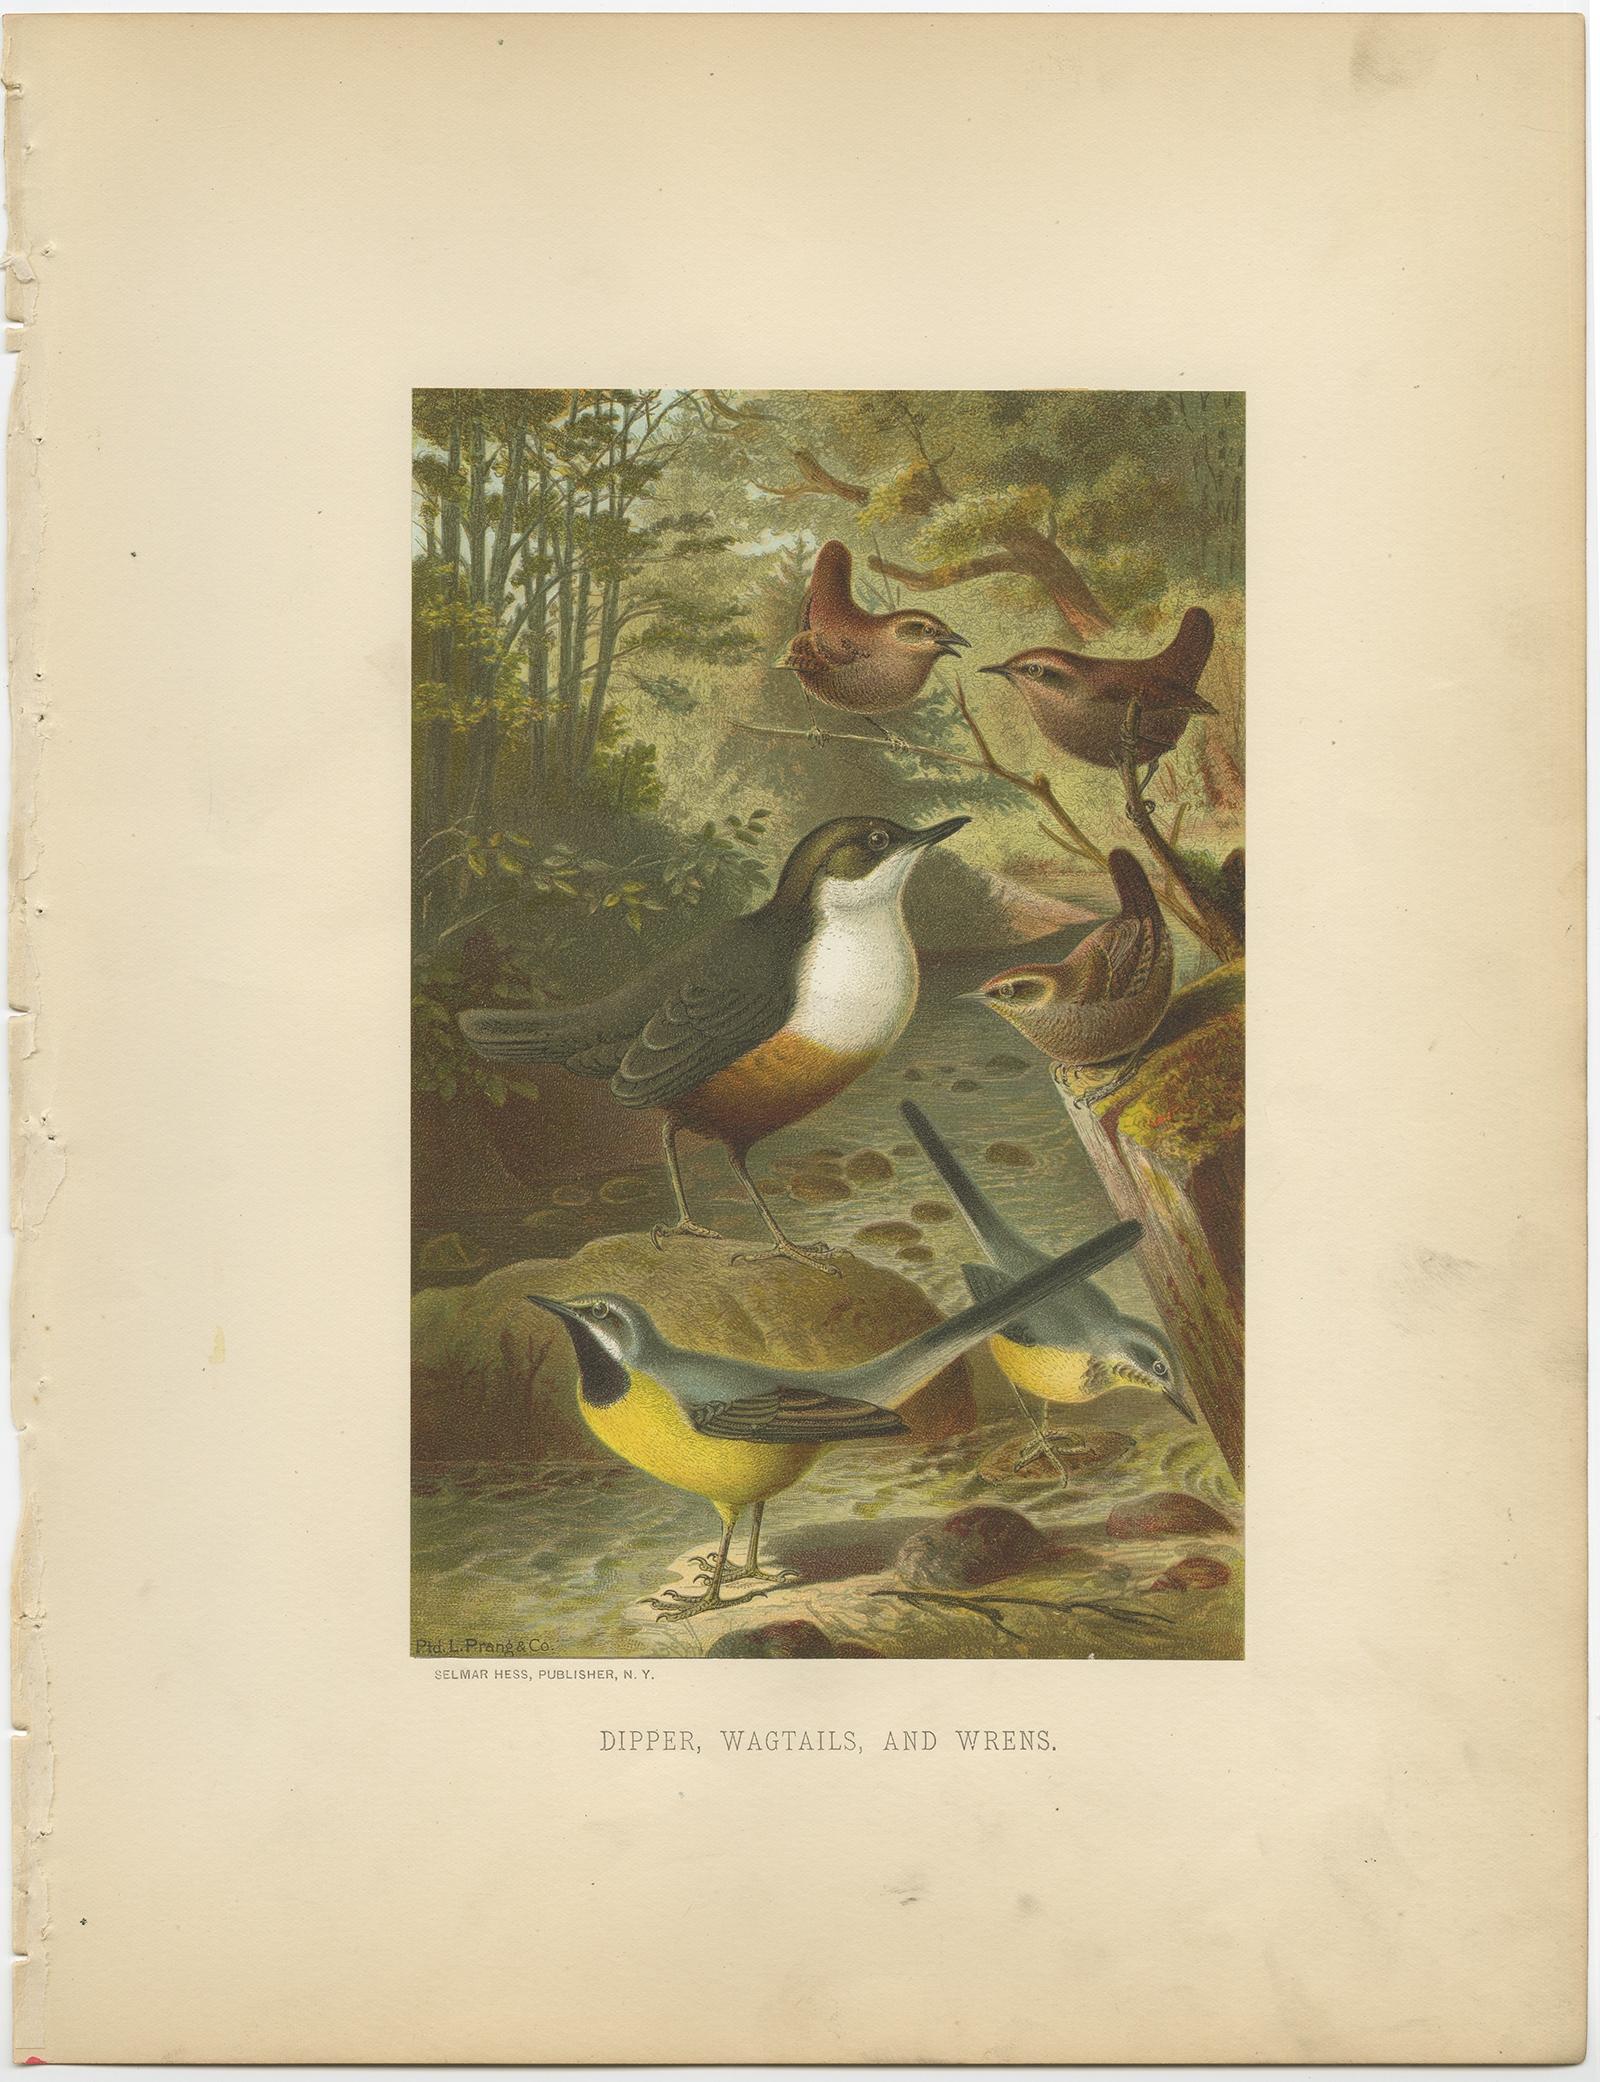 Antique bird print titled 'Dipper, Wagtails, and Wrens'. 

Old bird print depicting a group of the dipper, wagtail and wren. This chromolithograph originates from the natural history set 'Animate Creation' published in 1898 by Selmar Hess in New